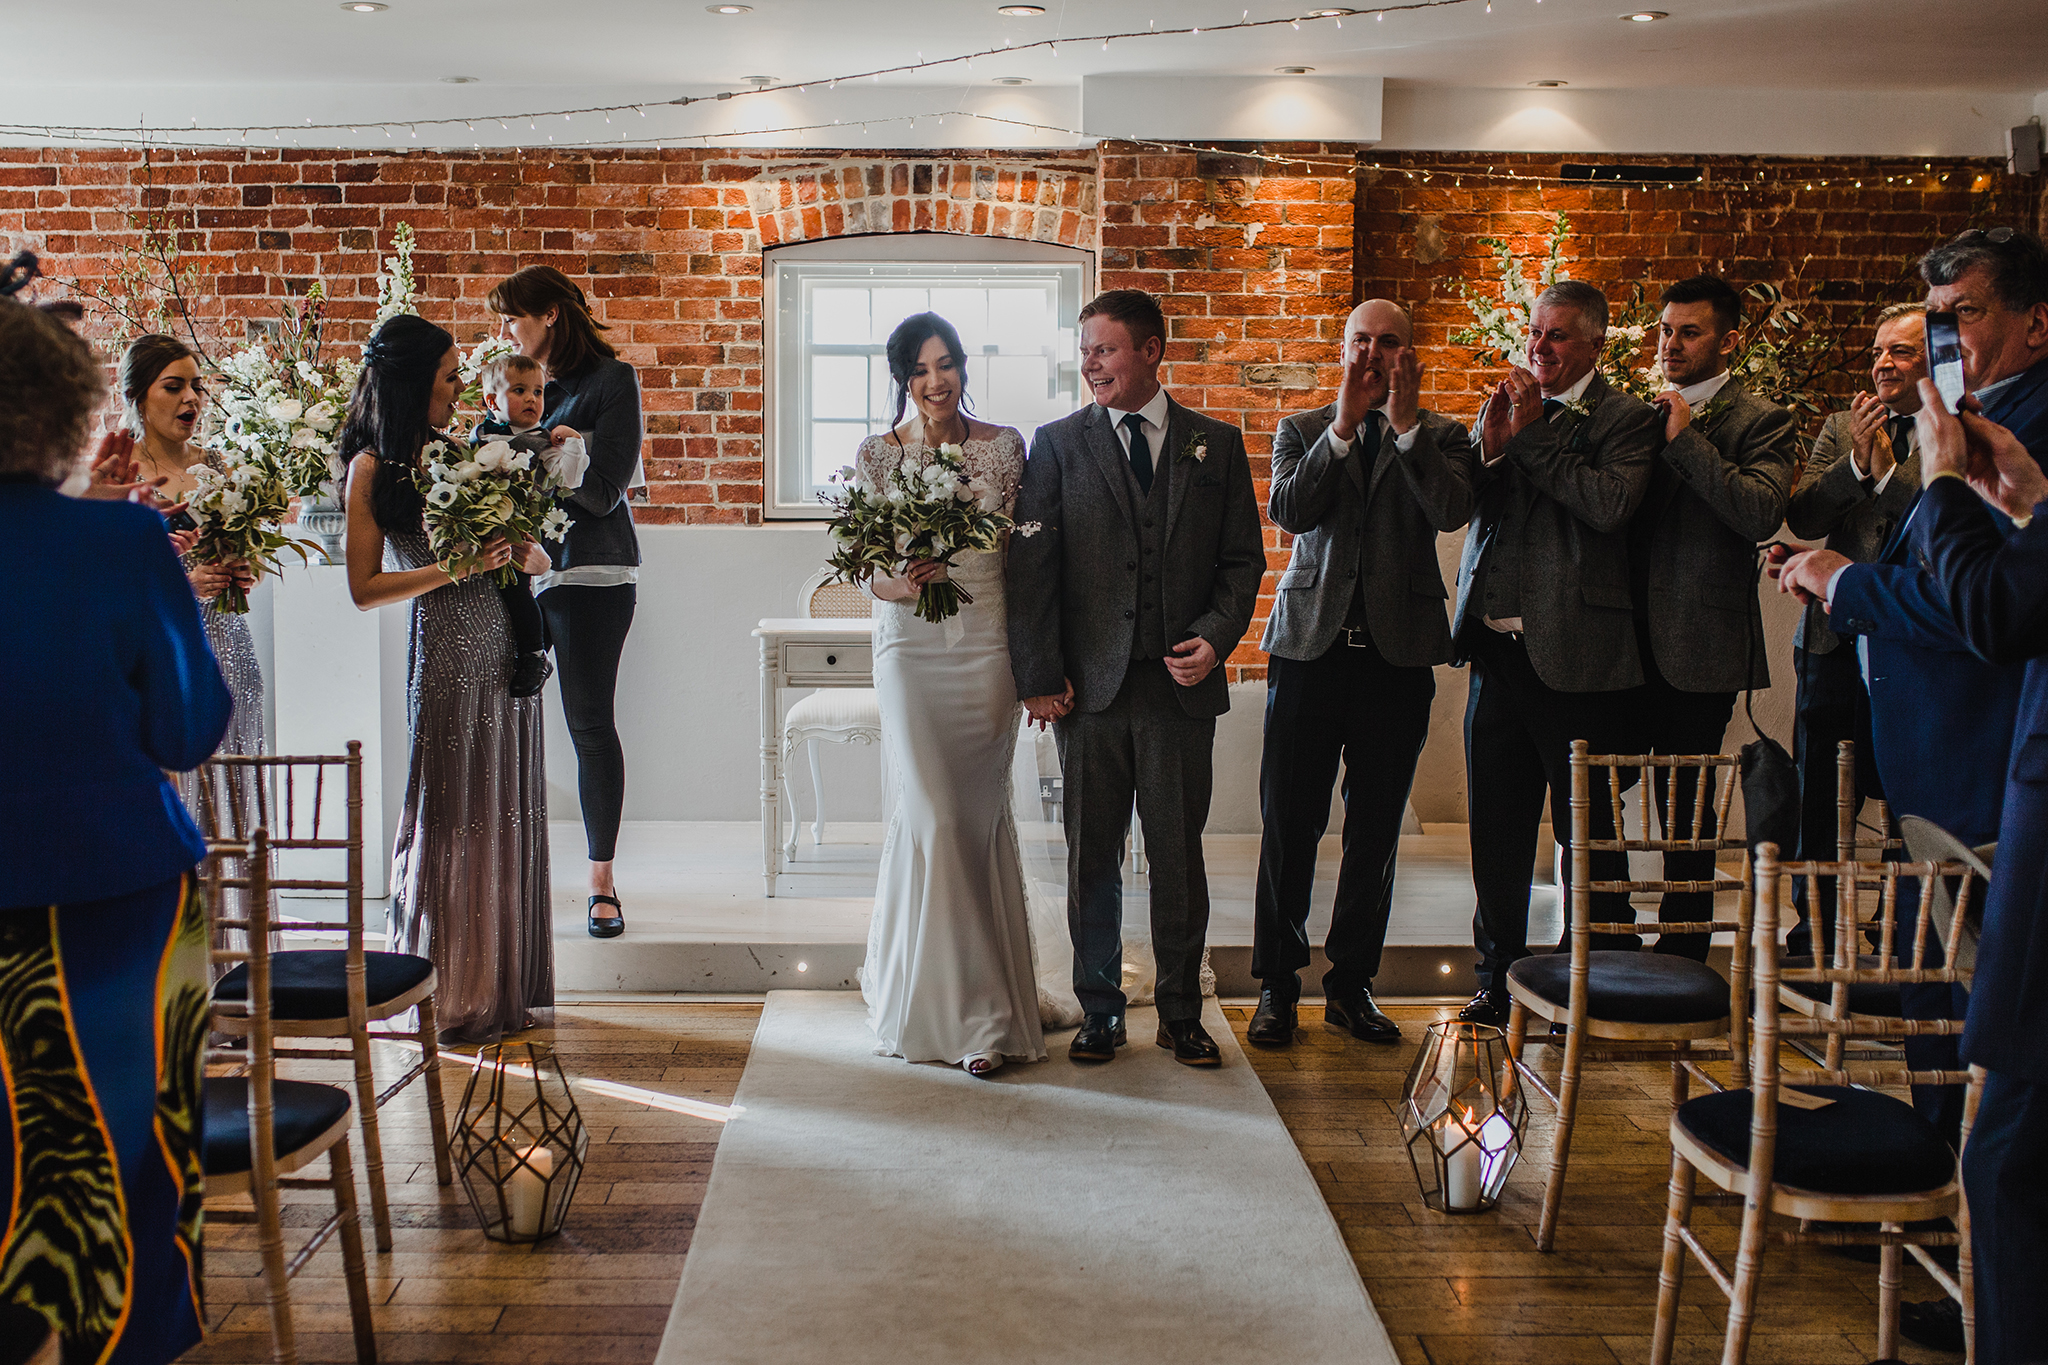 wide view of wedding room with bridal party